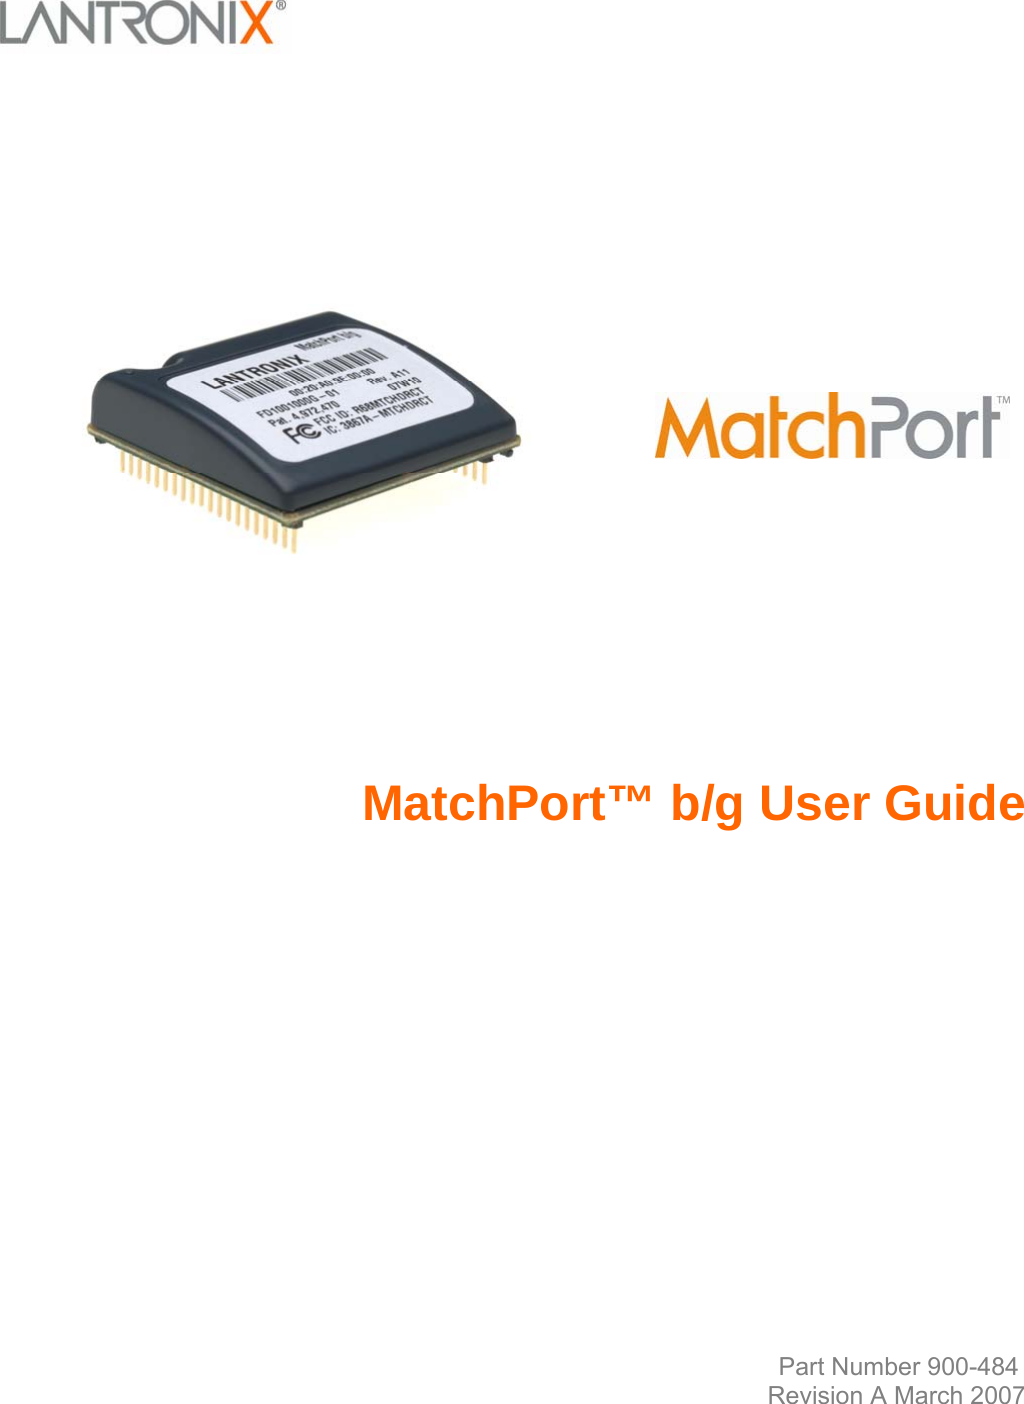                     MatchPort™ b/g User Guide               Part Number 900-484  Revision A March 2007